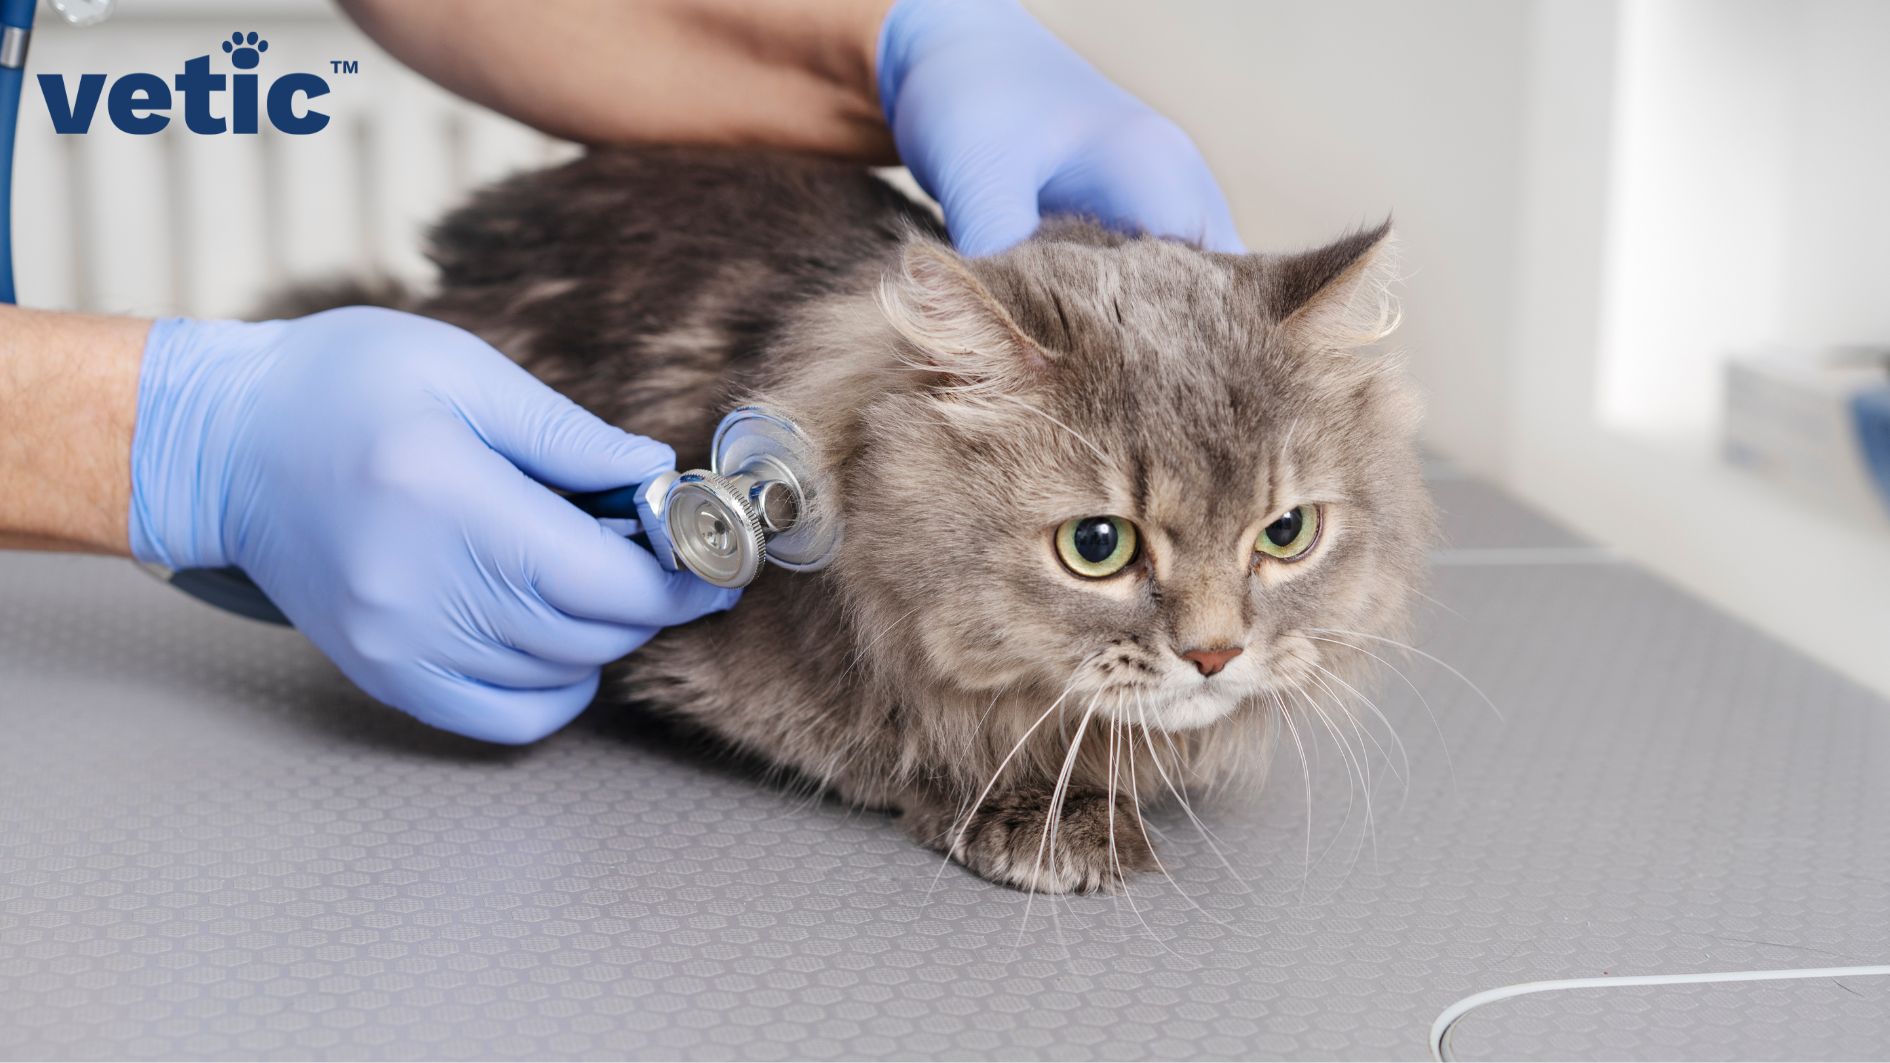 Cute grey and brown mixed breed short haired cat sitting on the examination table of a veterinarian. two gloved hands - one holding the cat and the other checking the vitals using a stethoscope. emergency in cats always warrants veterinarian visits.